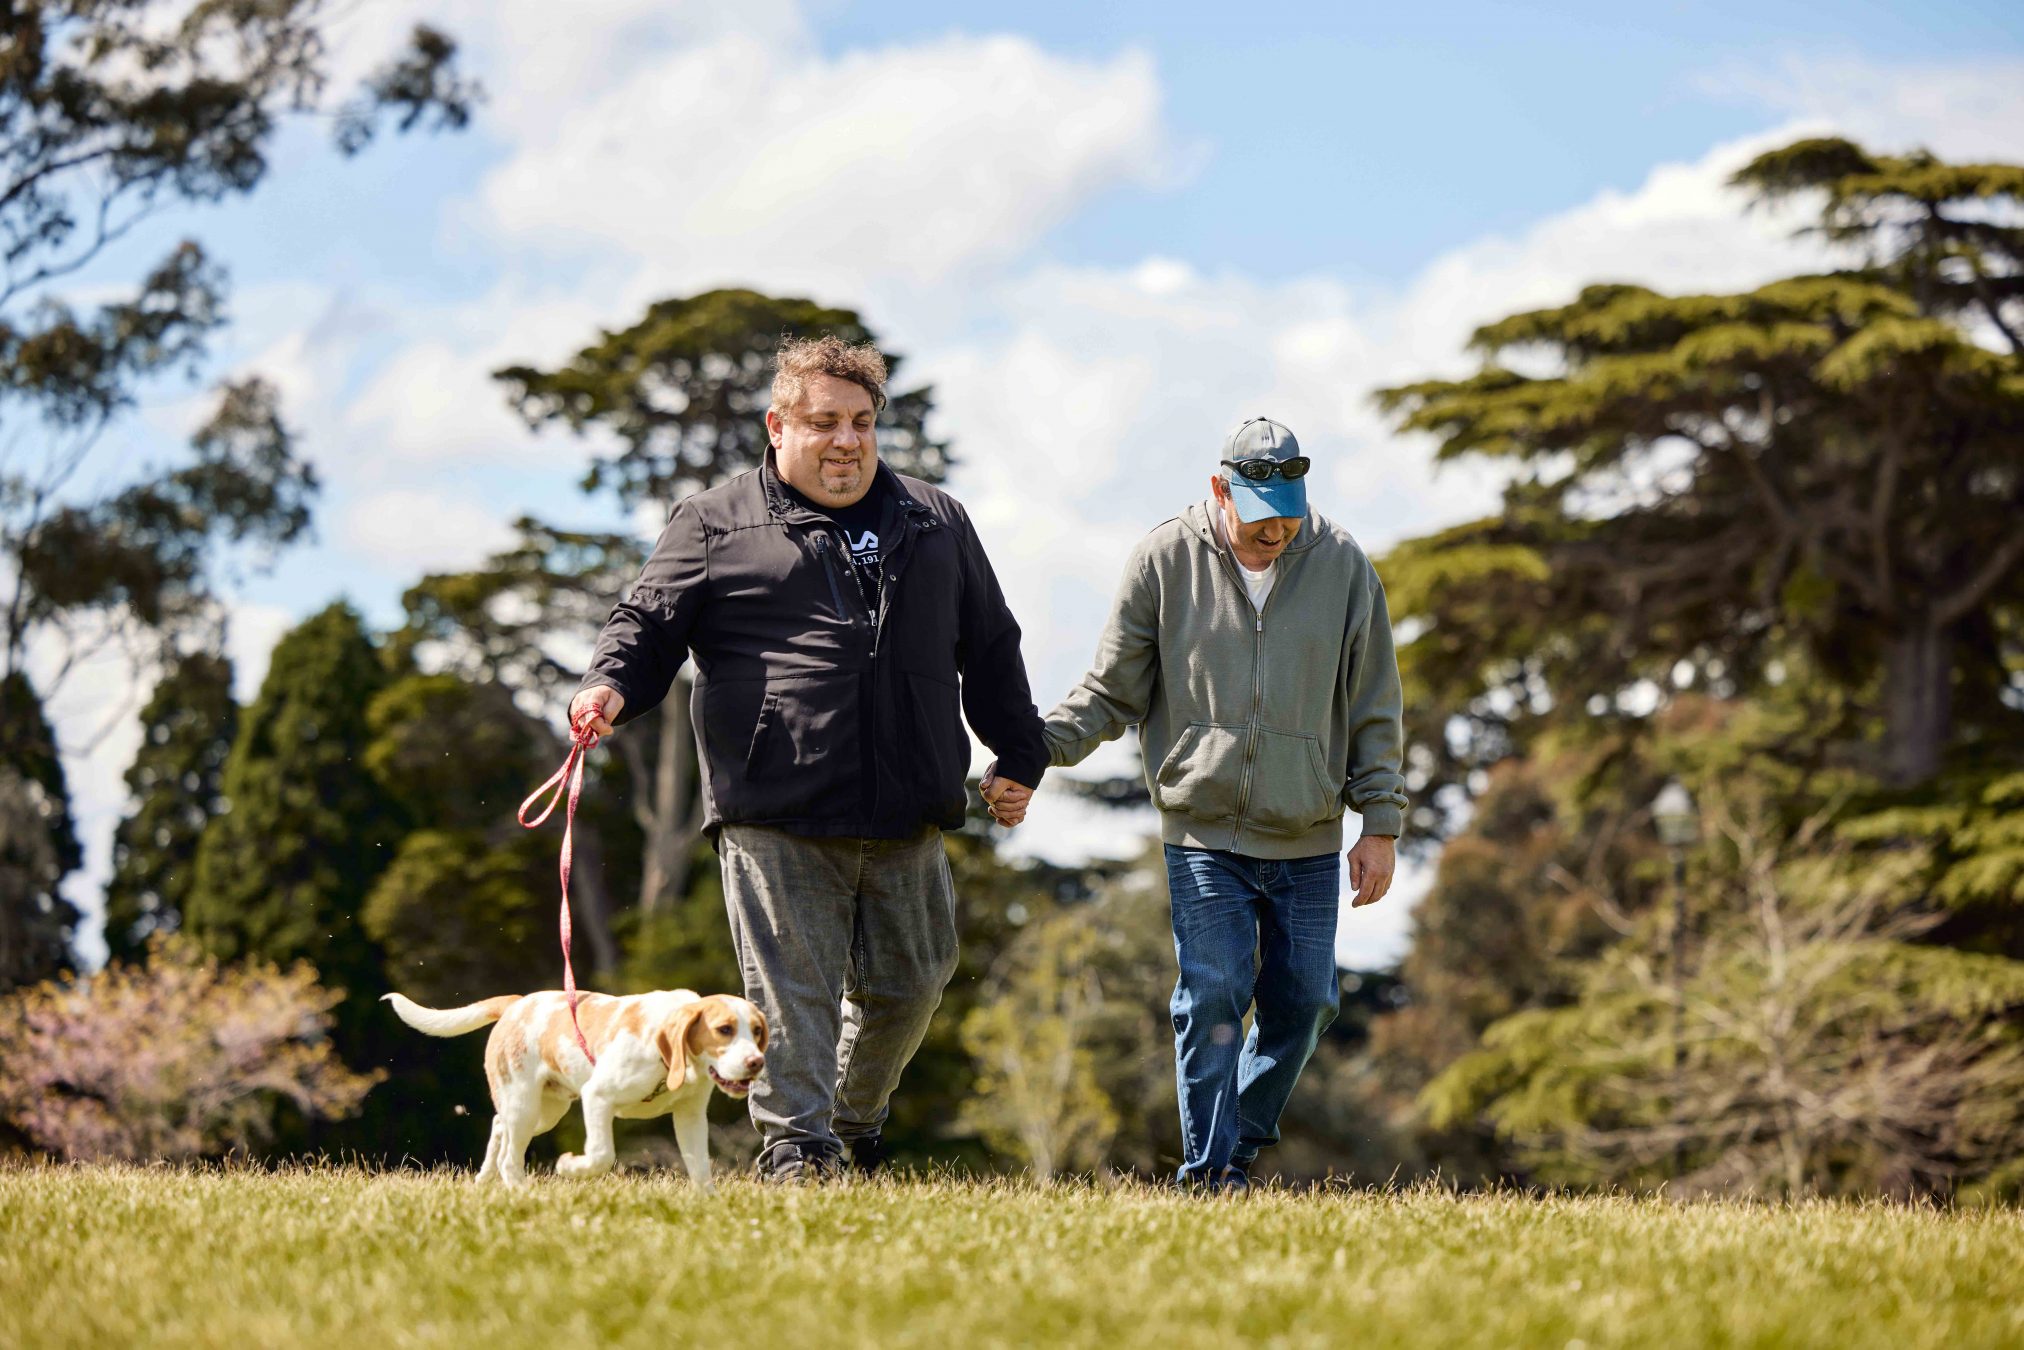 Client and Support Worker walking in park. The Support Worker is holding a dog on a leash.